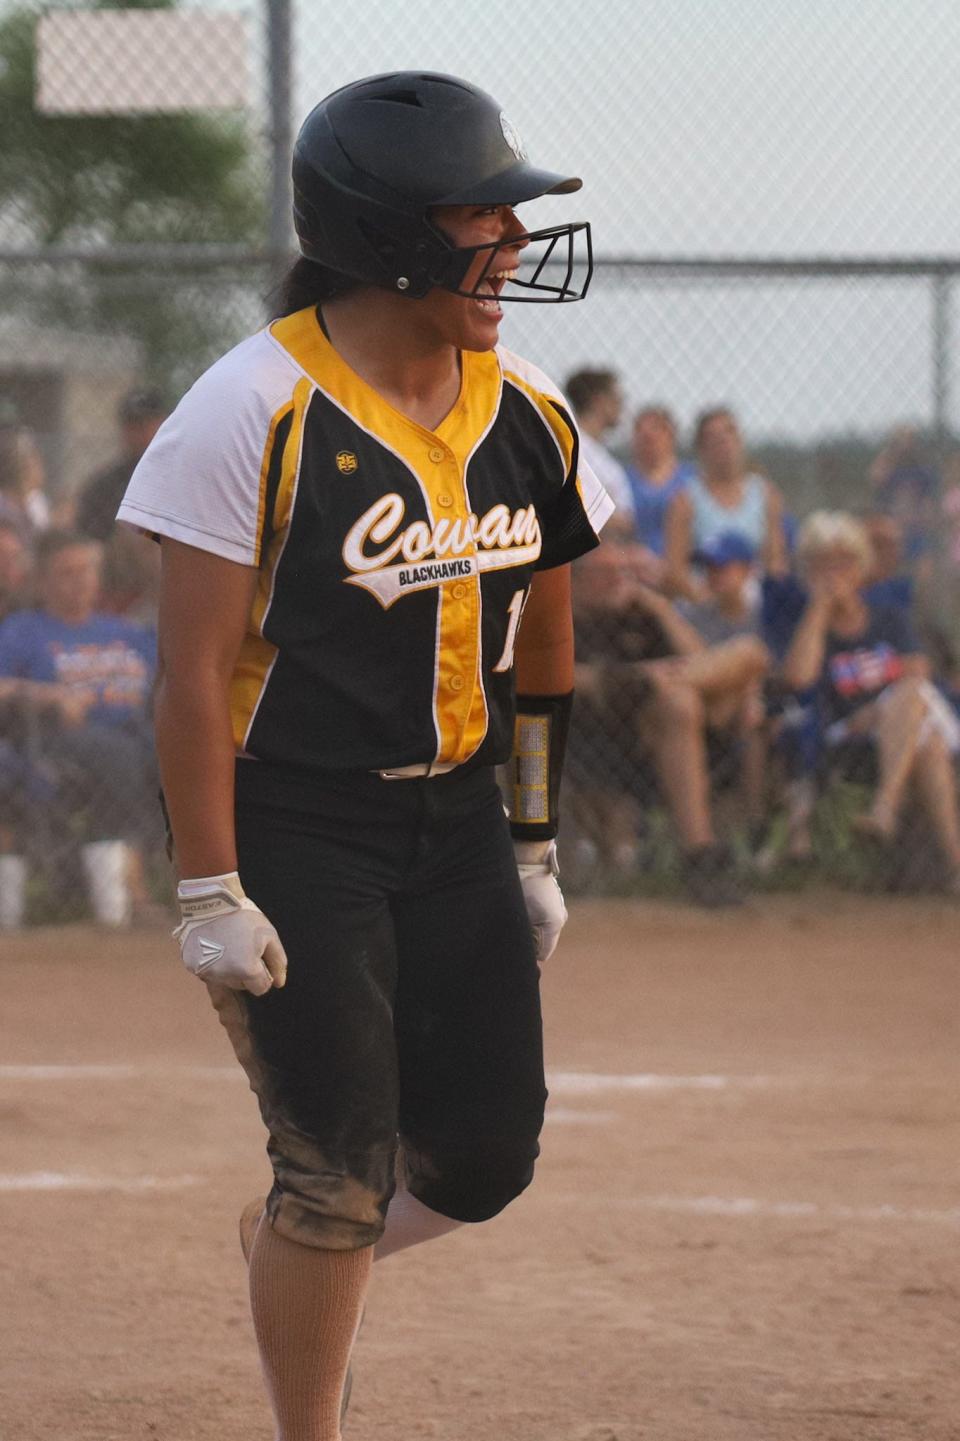 Cowan softball's Tatum Rickert pitched all eight innings in her team's regional championship game against Cambridge City Lincoln on Tuesday, May 31, 2022.